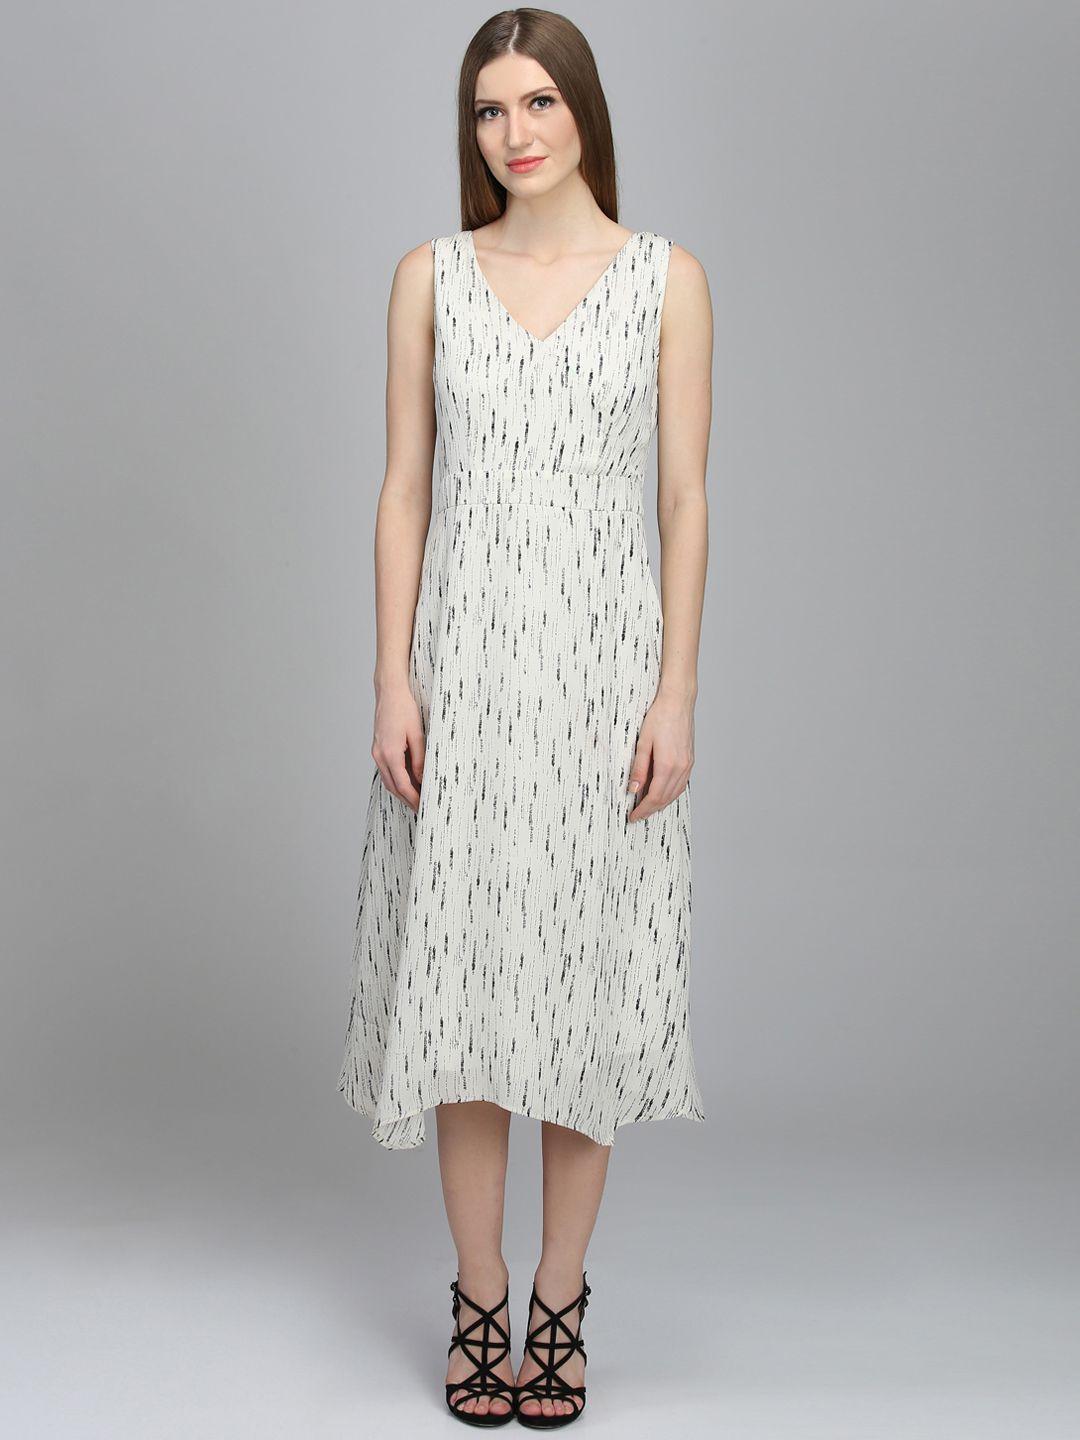 dodo & moa women off-white printed fit and flare dress